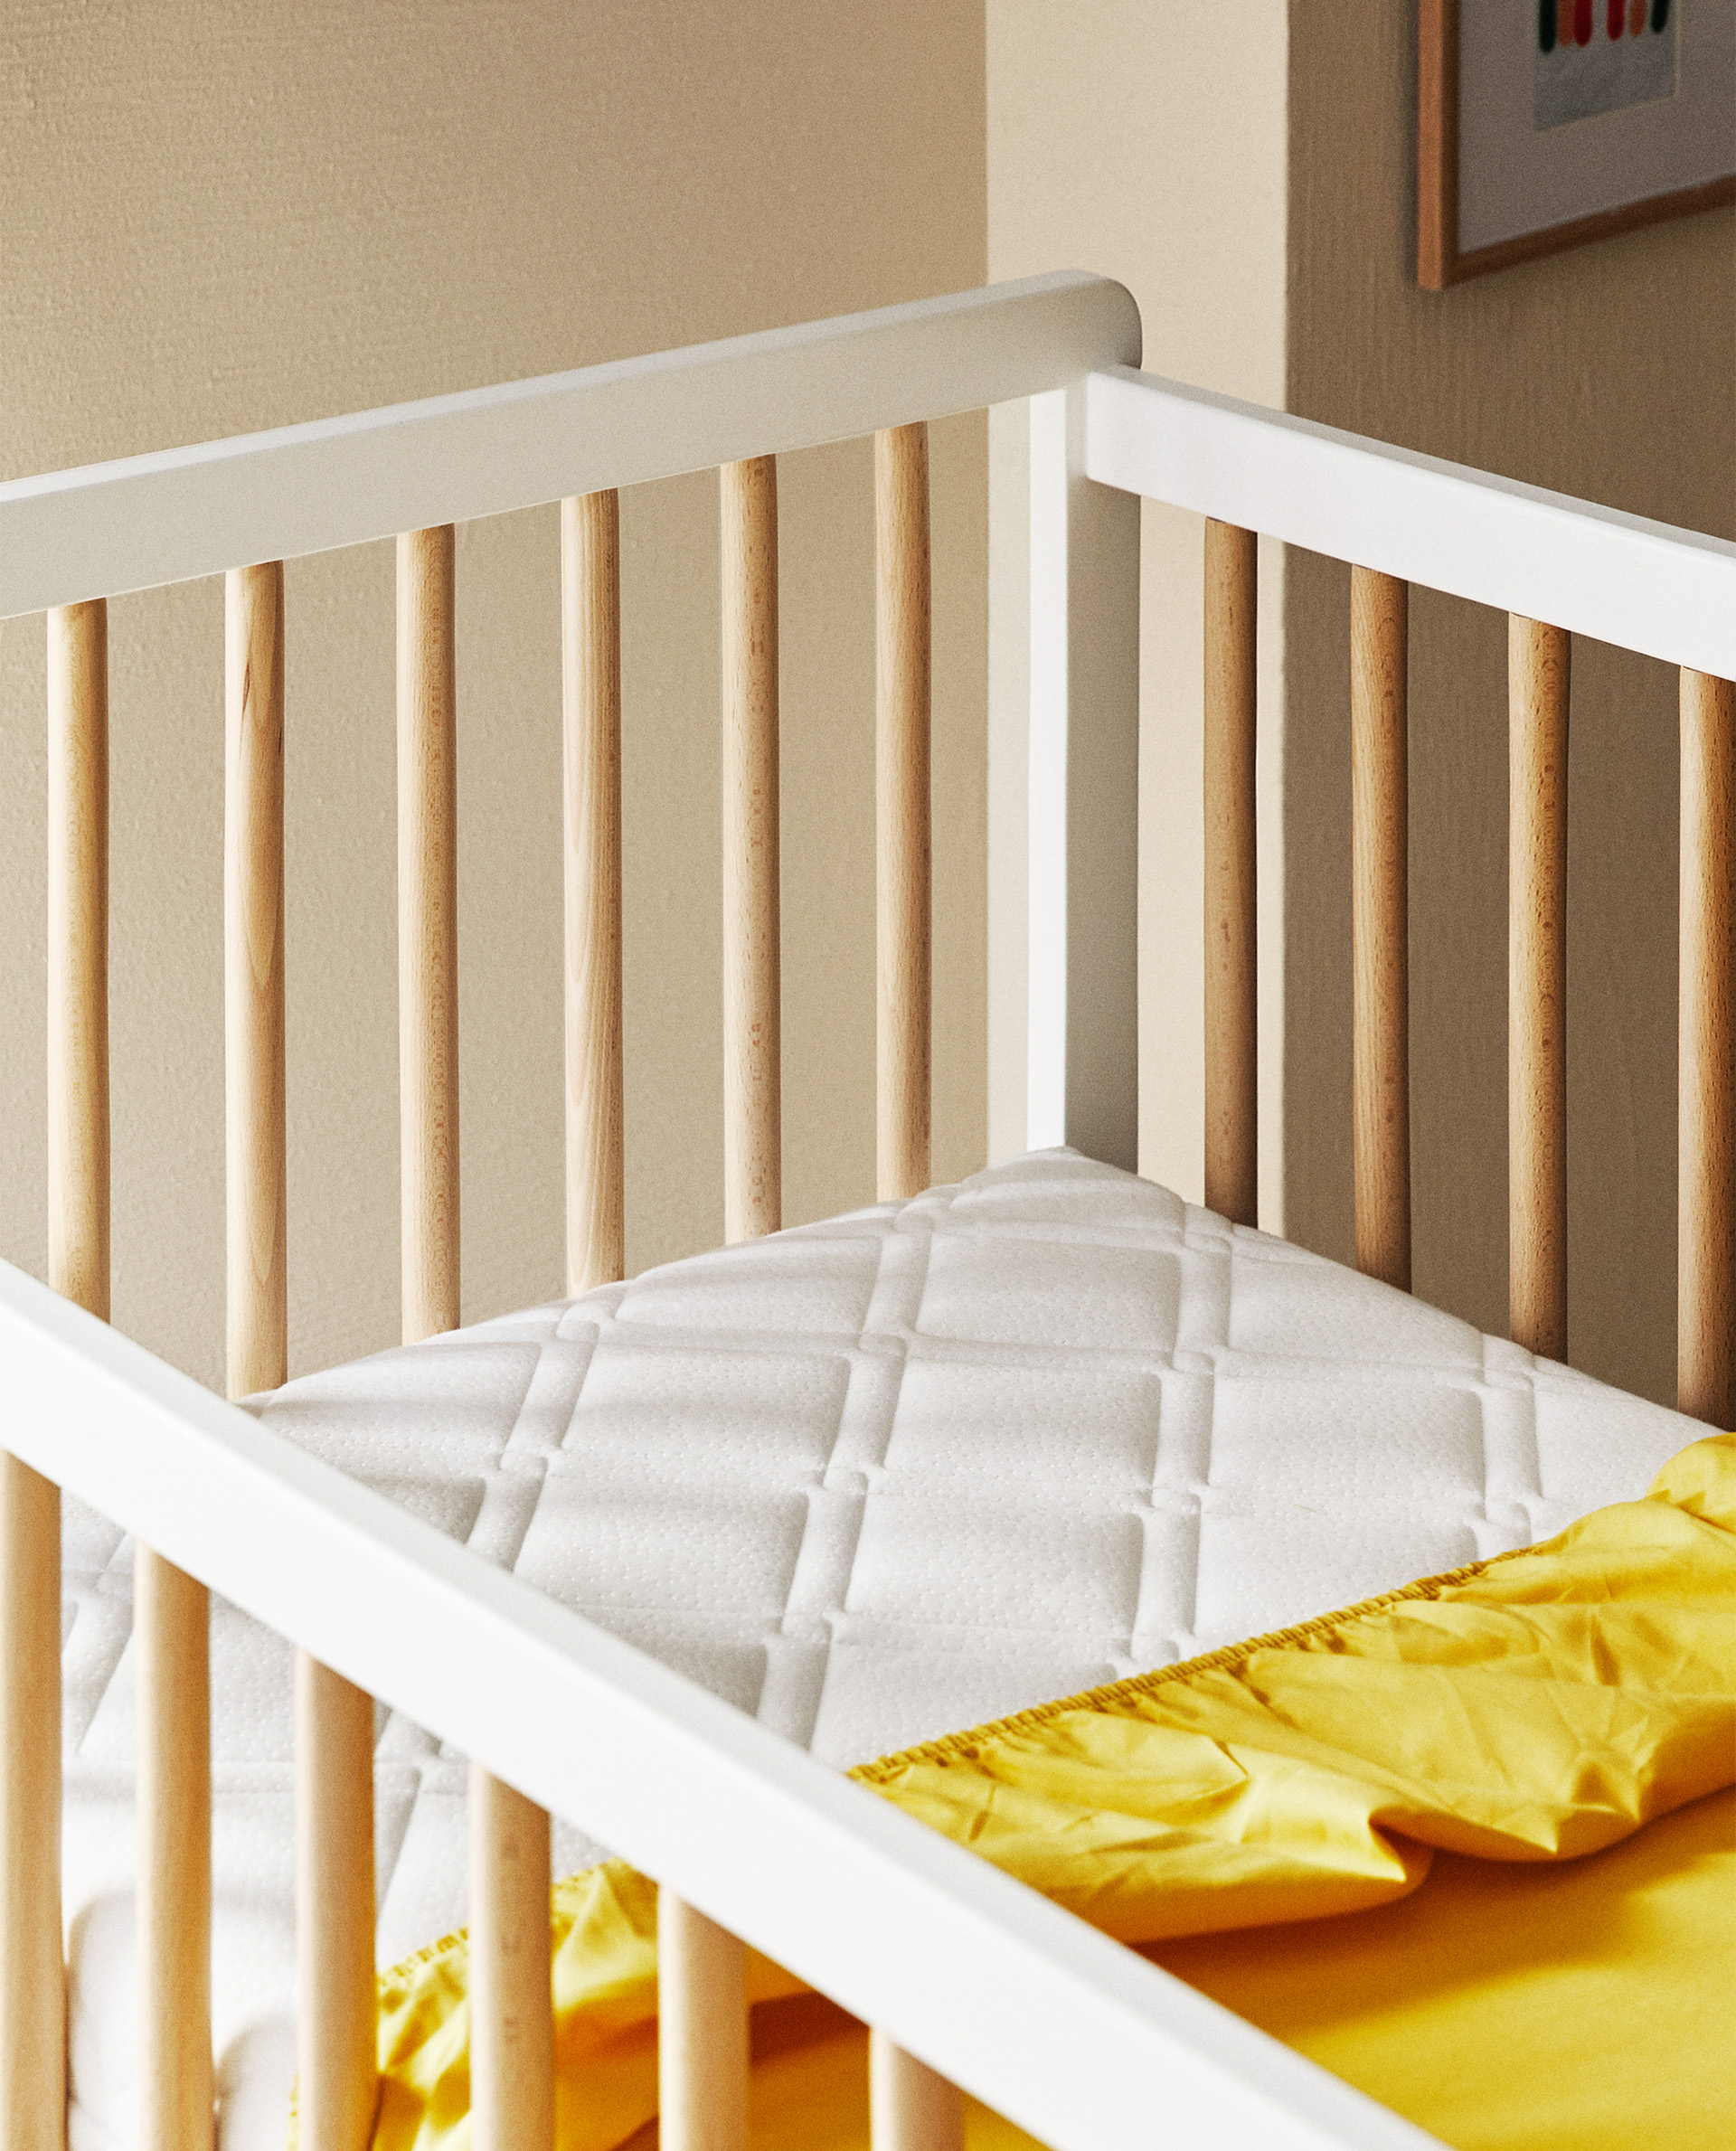 cot bed for kids